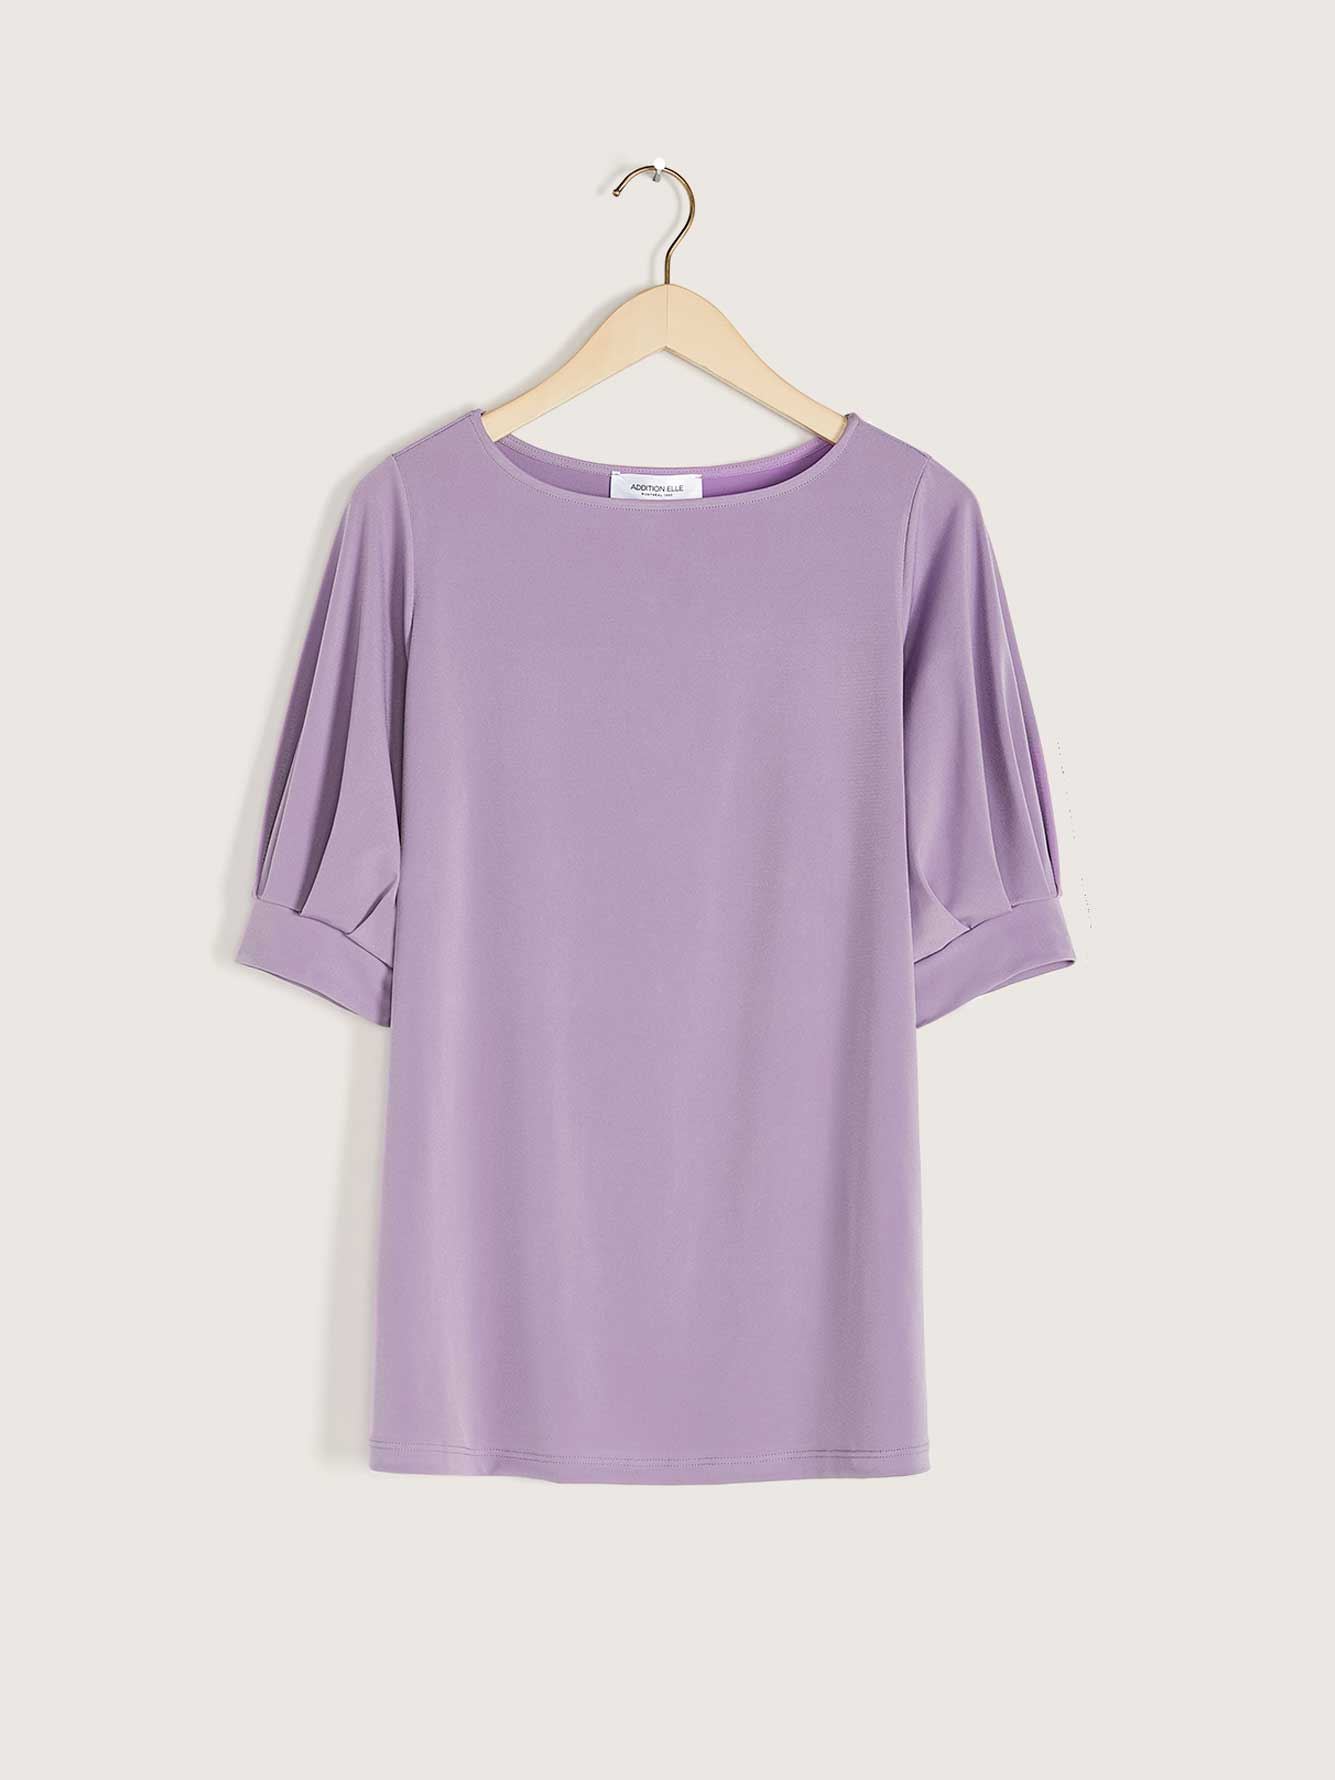 Boat Neck Elbow Sleeve Top - Addition Elle